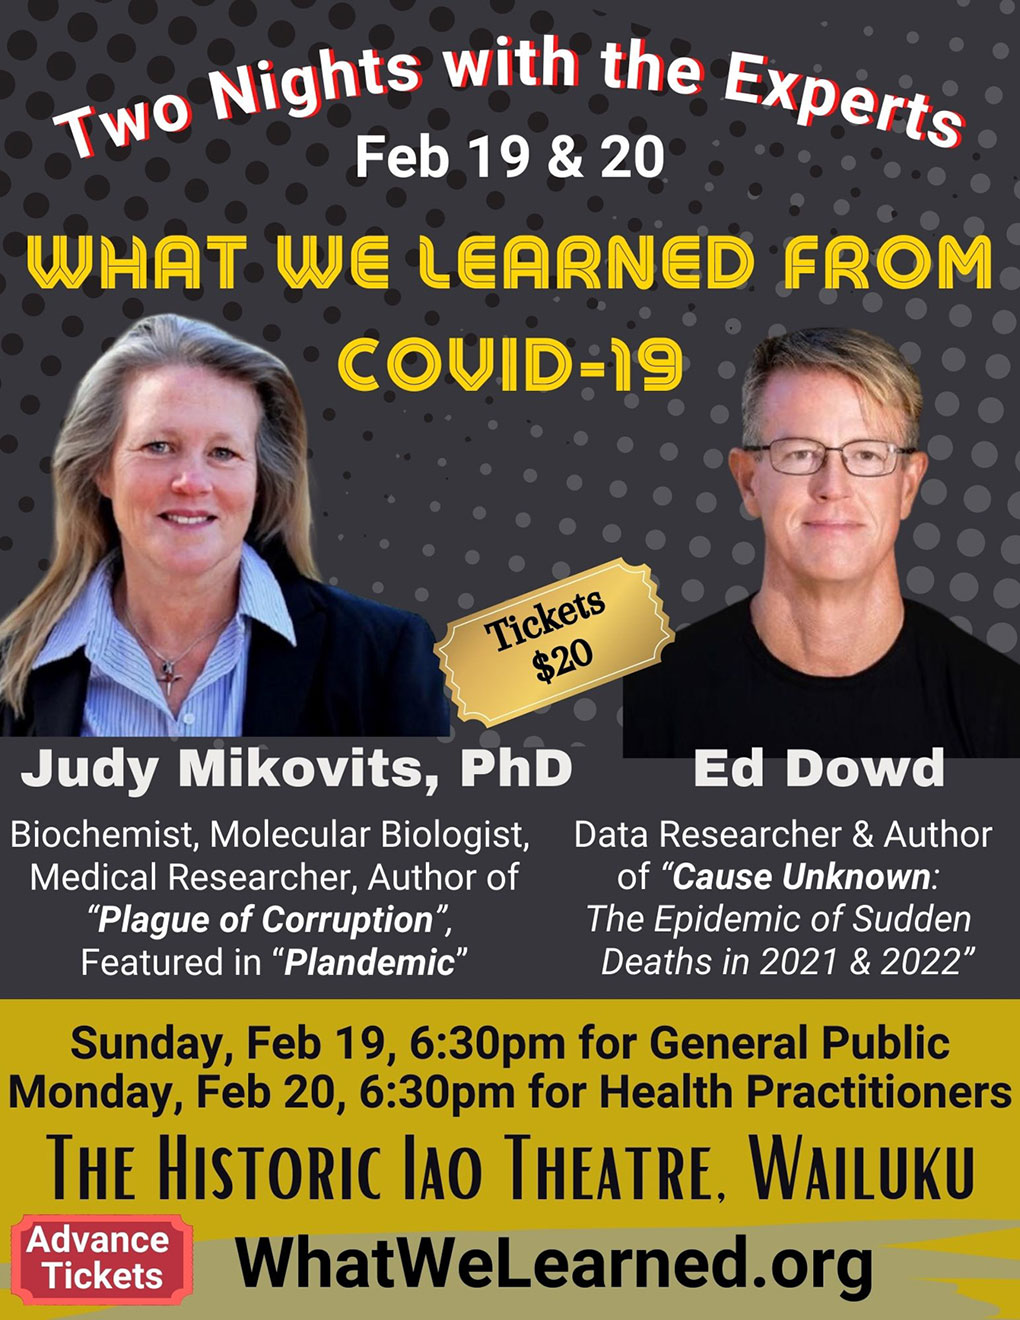 What We Learned From Covid-19 February 19 – 20 – MAUI